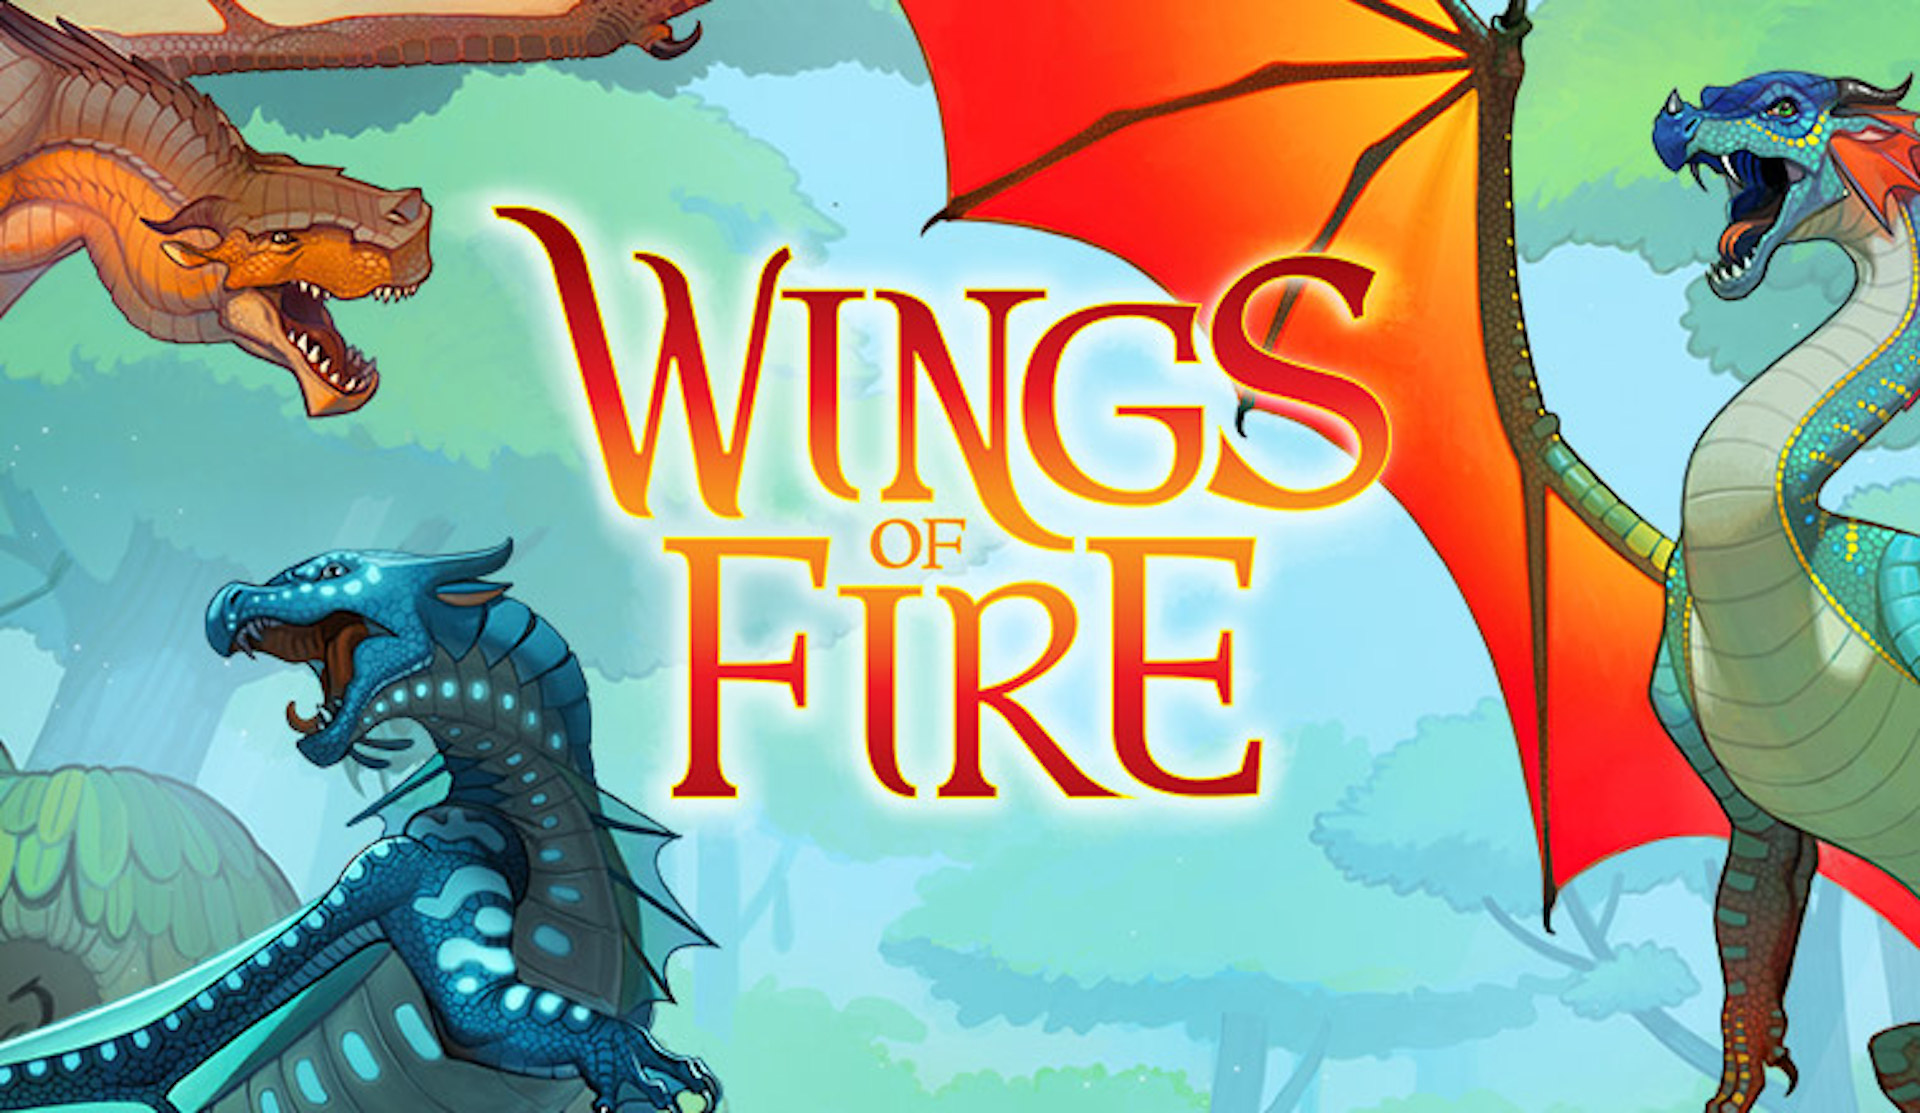 Ava DuVernay gets into animation with Netflix adaptation of Wings of Fire |  GamesRadar+